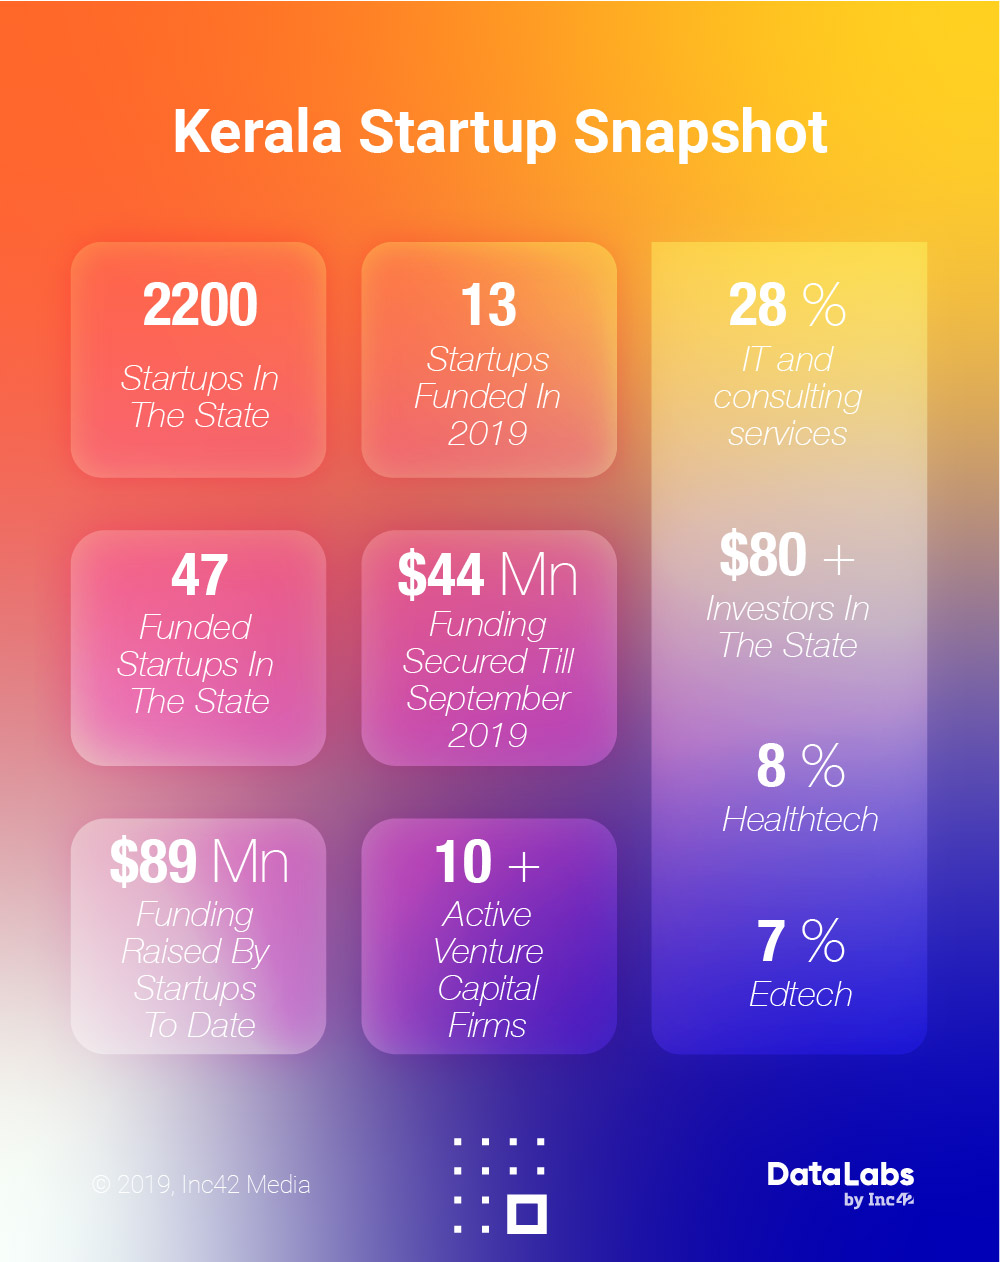 Kerala Startup Ecosystem Report 2019: How Kerala Nurtures Innovation To Support Over 2200 Startups In The State